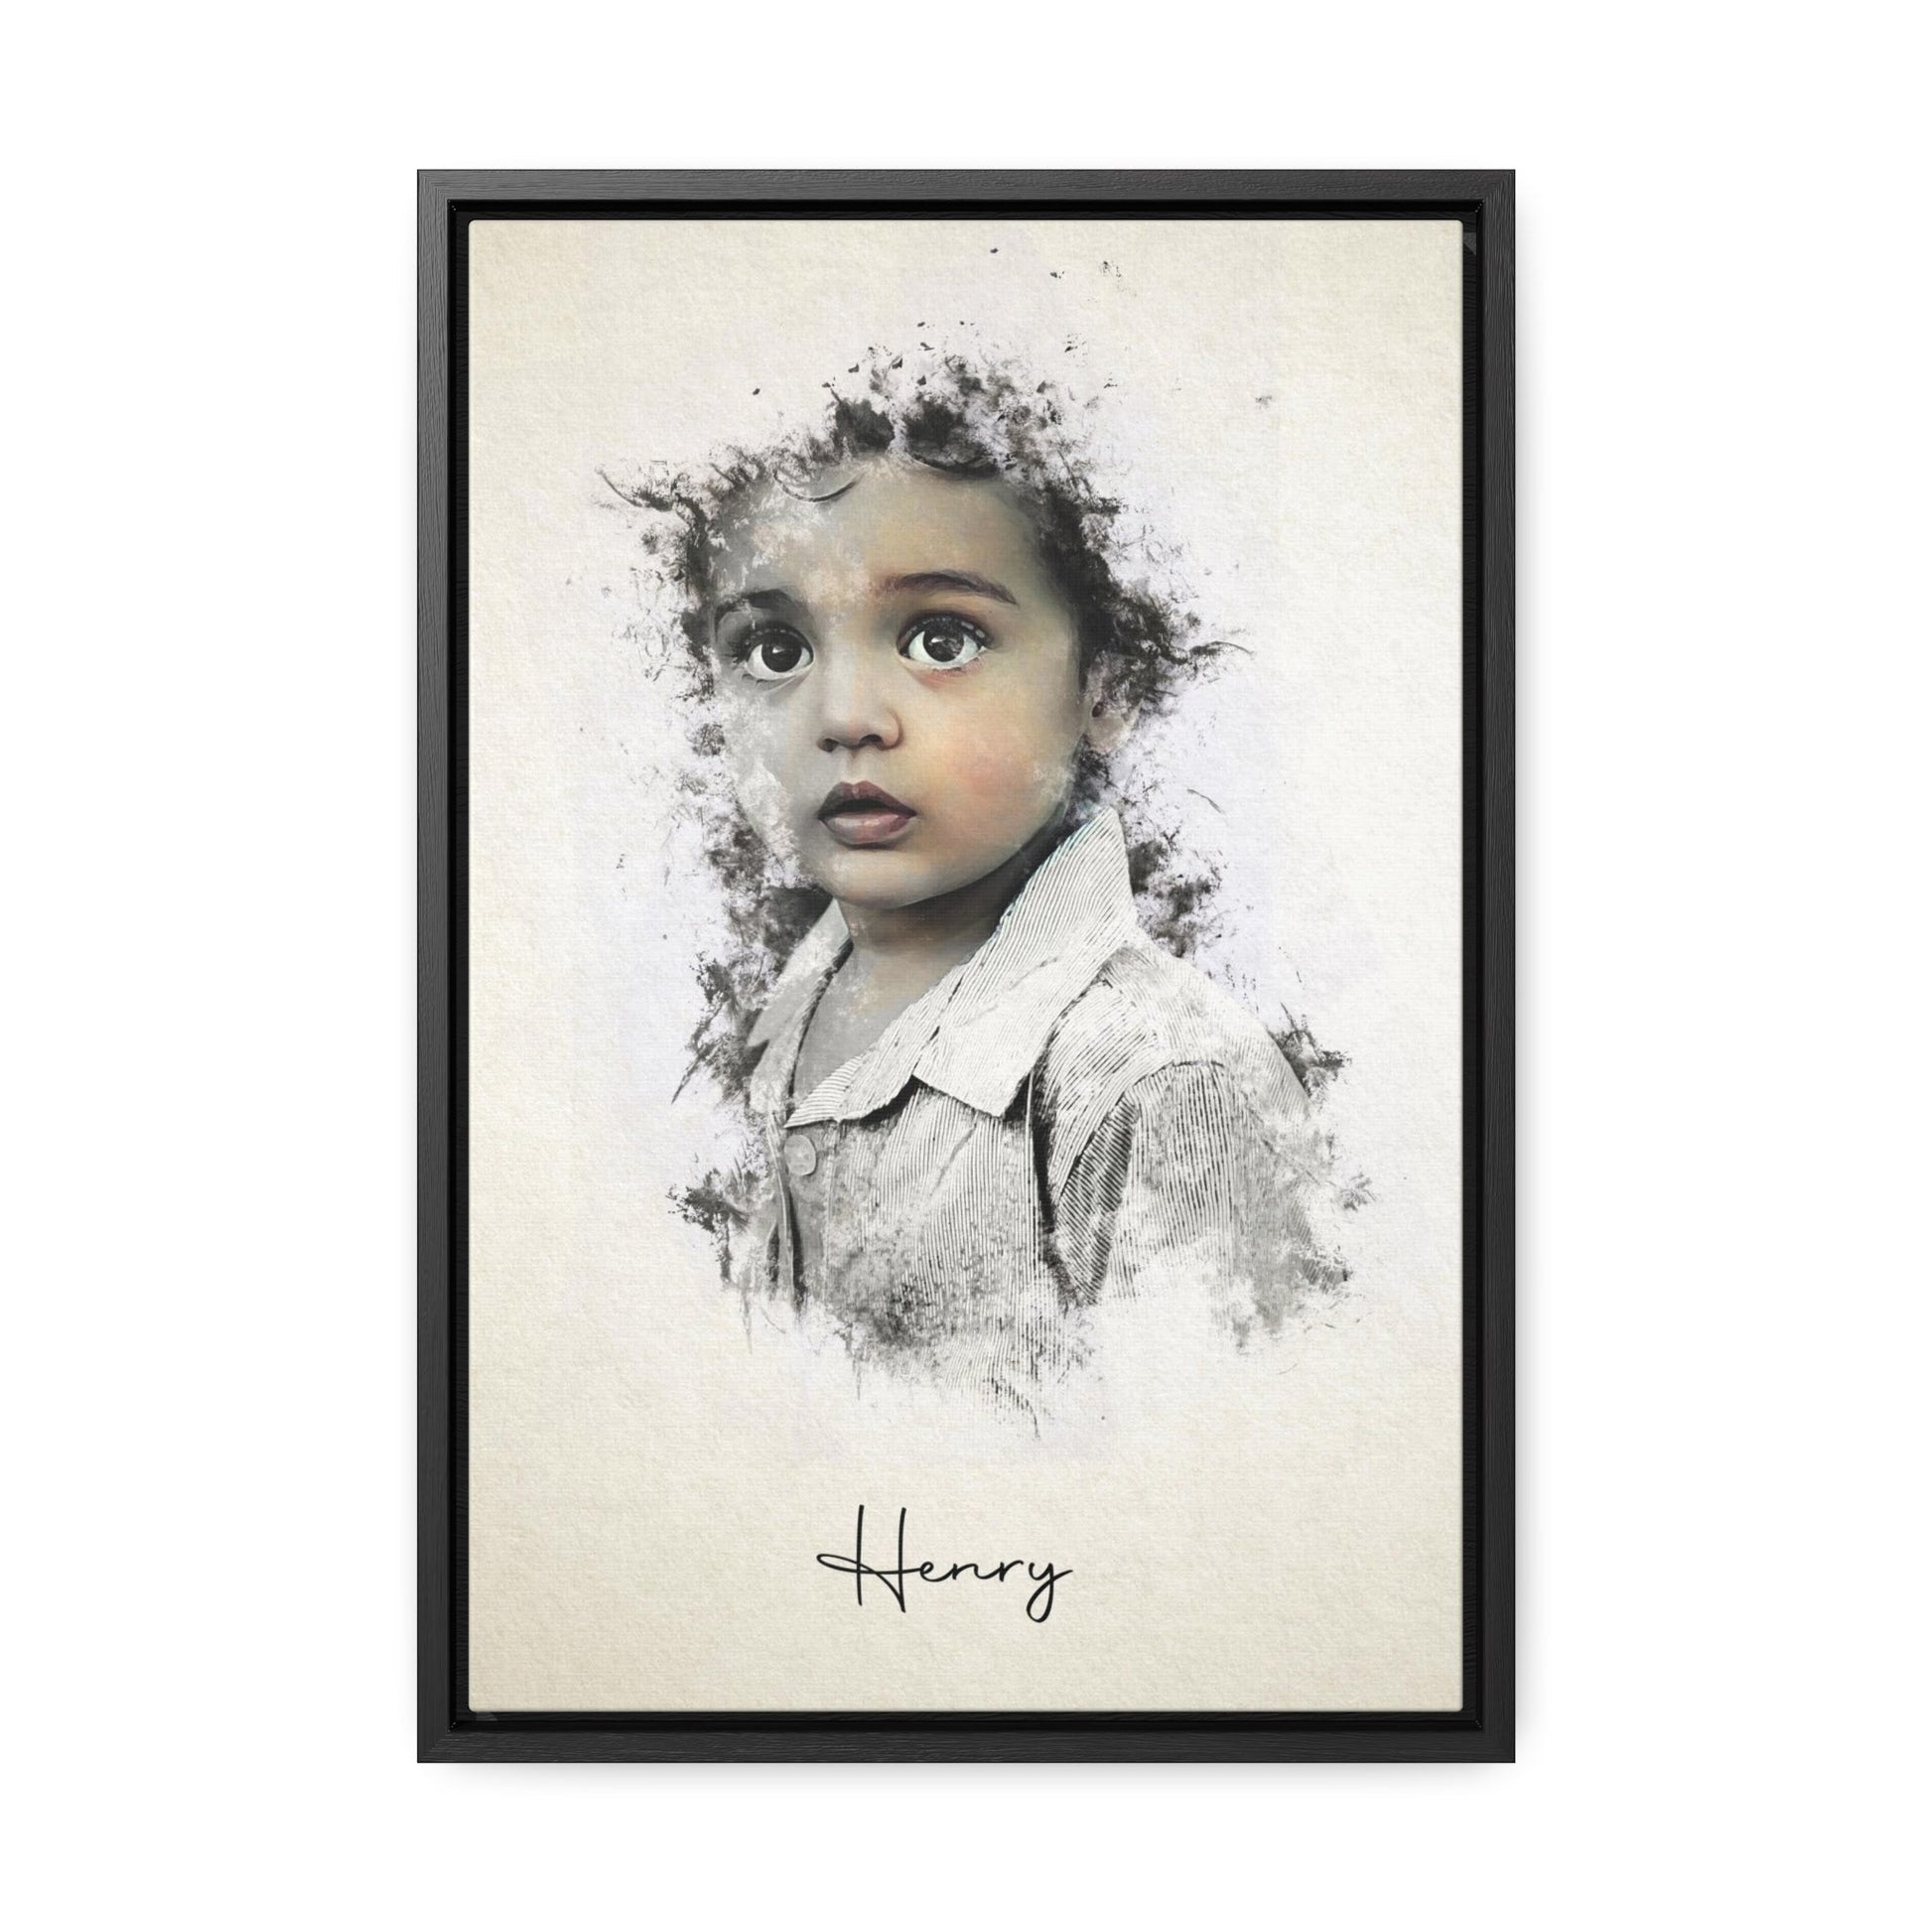 Personalized baby portrait on canvas, framed with care.